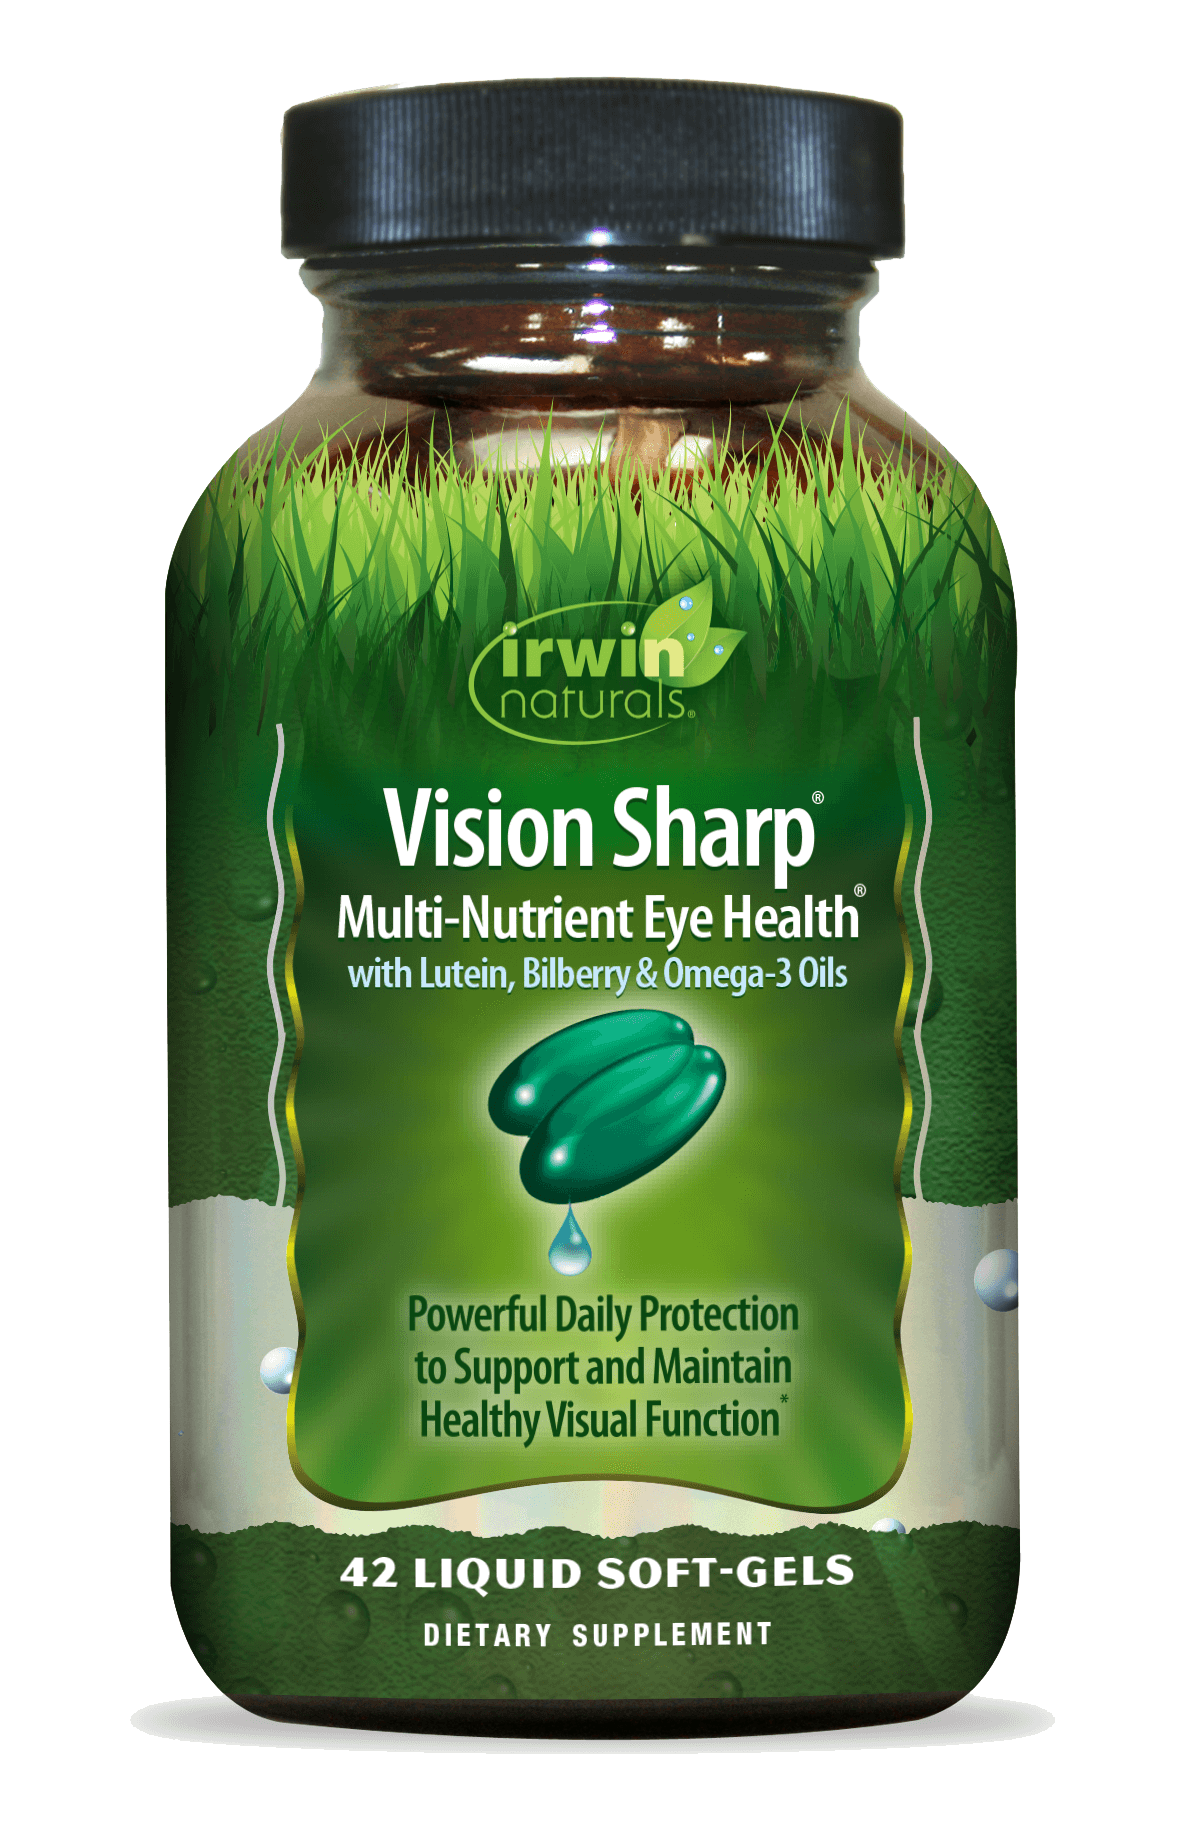 Vision Sharp Multi Nutrient Eye Health with Lutein, Bilberry and Omega 3 Oils by Irwin Naturals